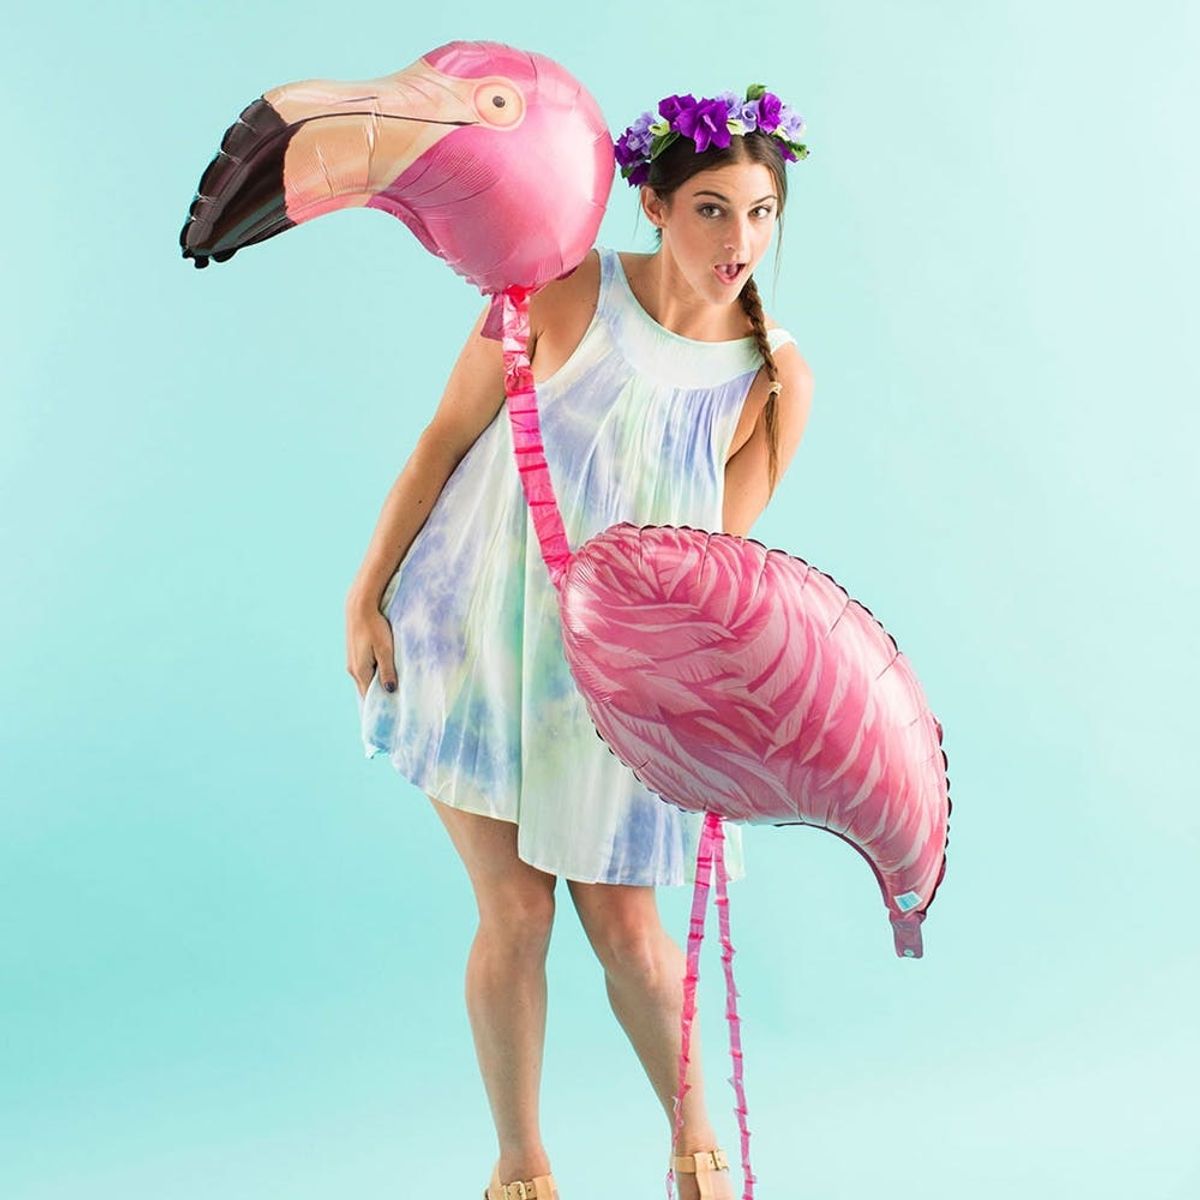 10 of the Craziest Balloons Your Next Party Needs